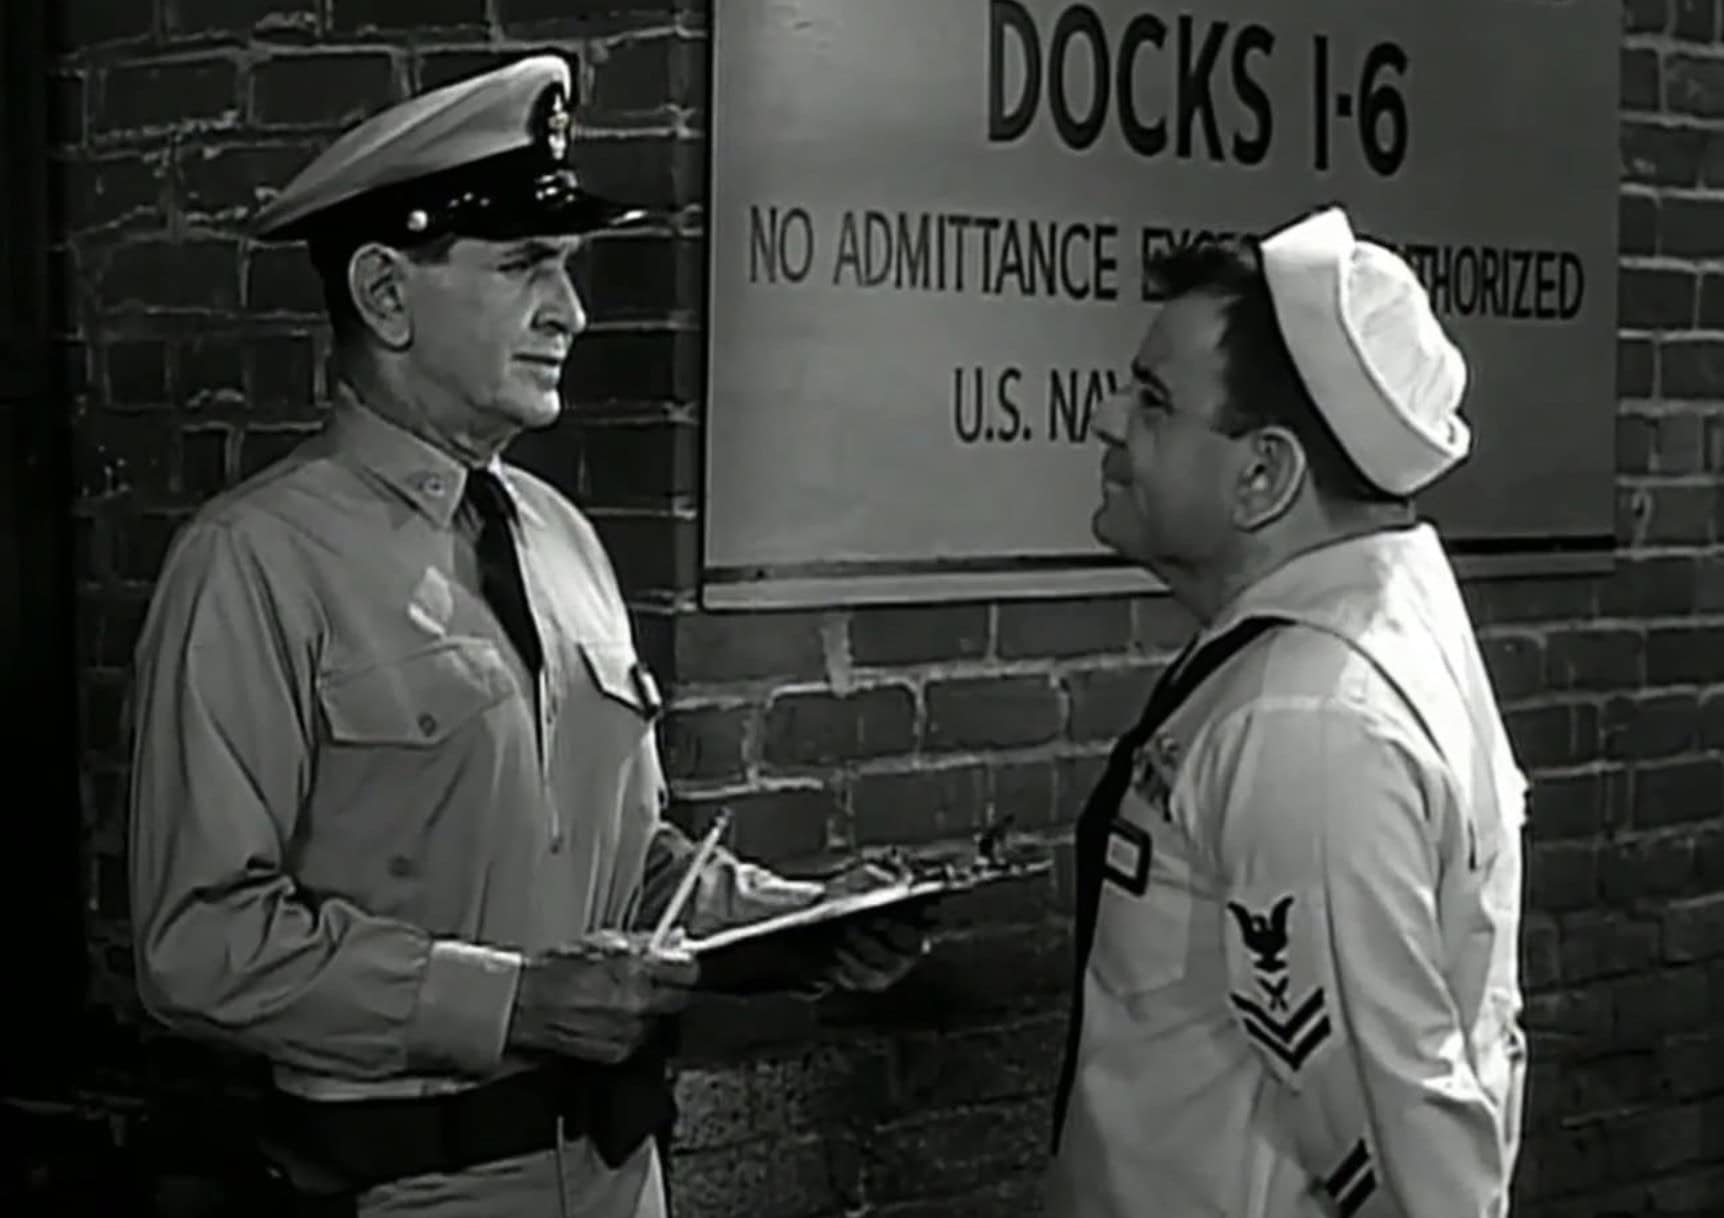 <ul> <li><strong>Director:</strong> Norman Panama</li> <li><strong>Cast:</strong> Richard Widmark, Lee J. Cobb, Tina Louise, Earl Holliman, and Lorne Greene</li> </ul> <p>Another sci-fi film, "The Atomic Submarine," makes our list. It was released on November 29, 1959, and was moderately successful. "The Atomic Submarine" was produced with an estimated budget of $135,000. This monster-style invasion film is campy, fun, and also chilling. It has a runtime of 72 minutes.</p>